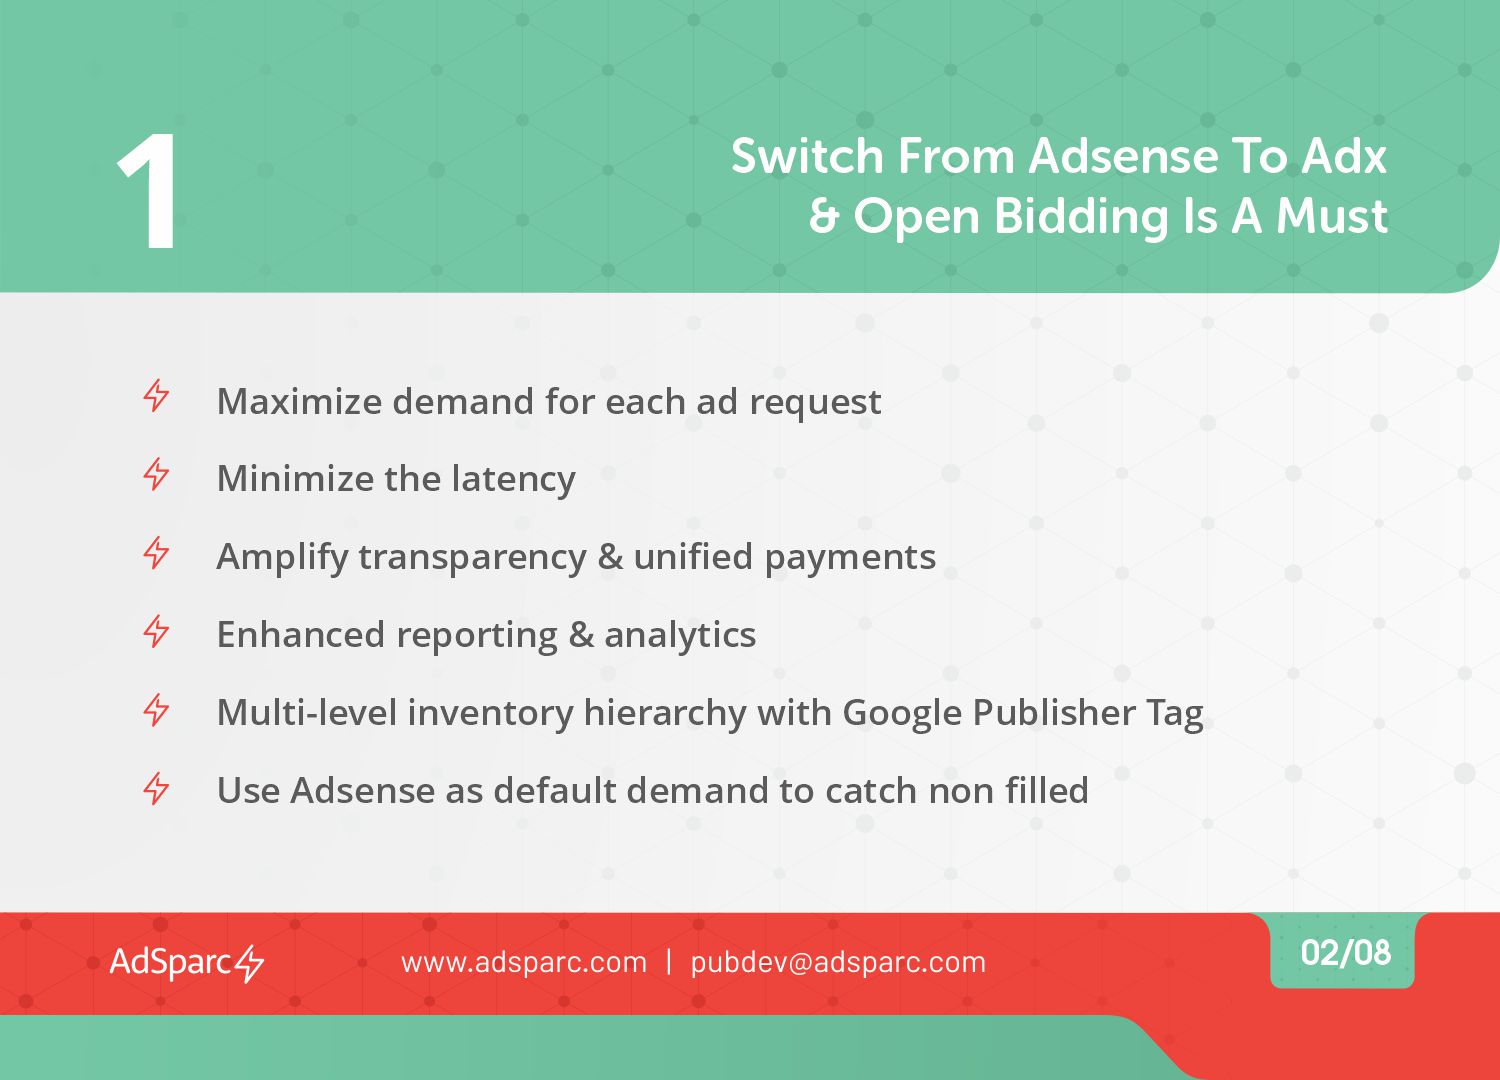 benefits of google open bidding and adx